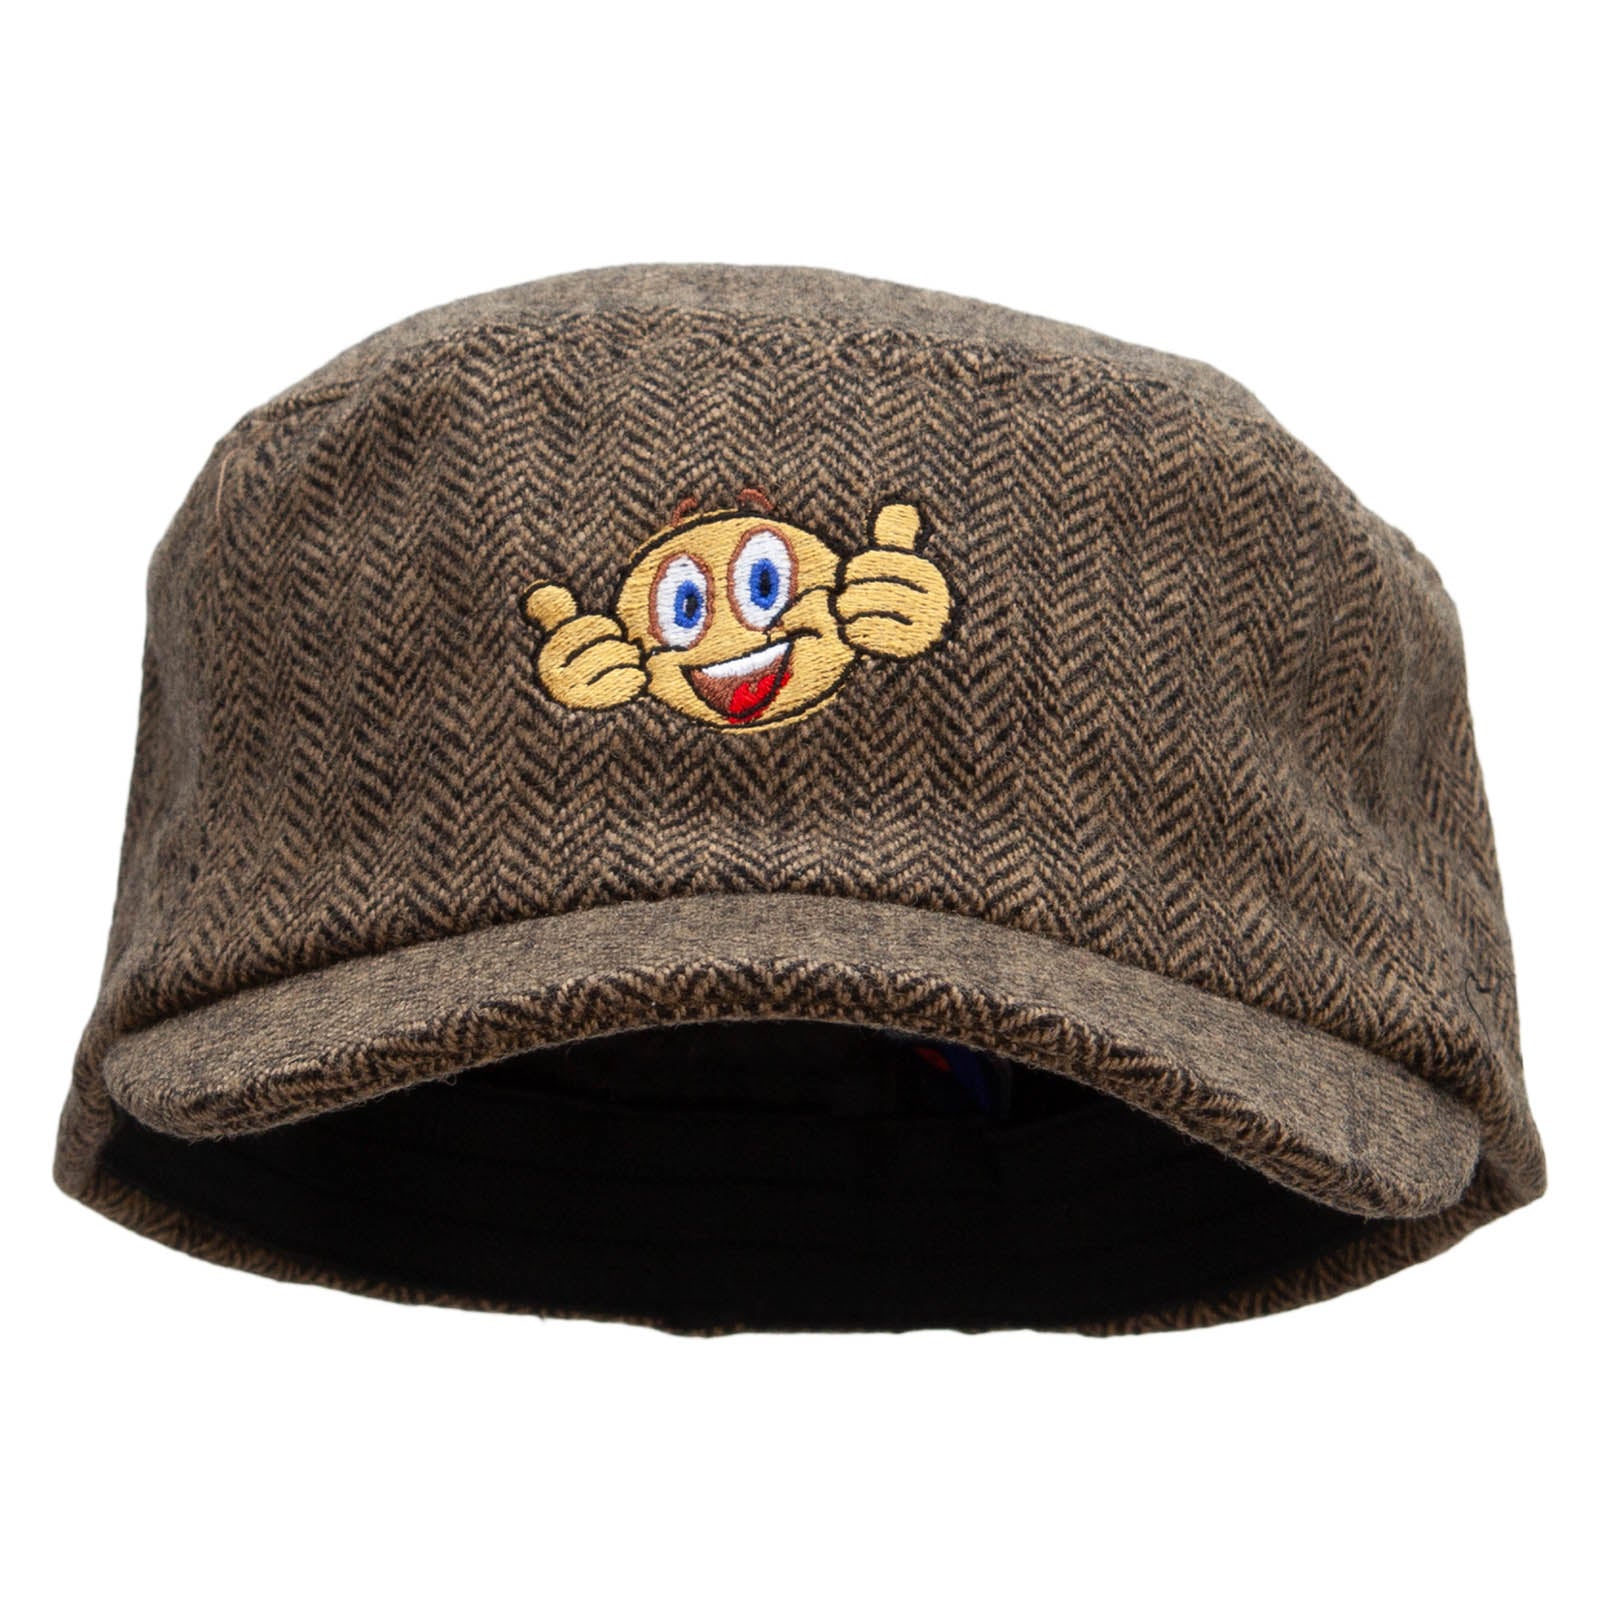 Emoji Two Thumbs Up Wool Fashion Fitted Engineer Cap - Brown OSFM